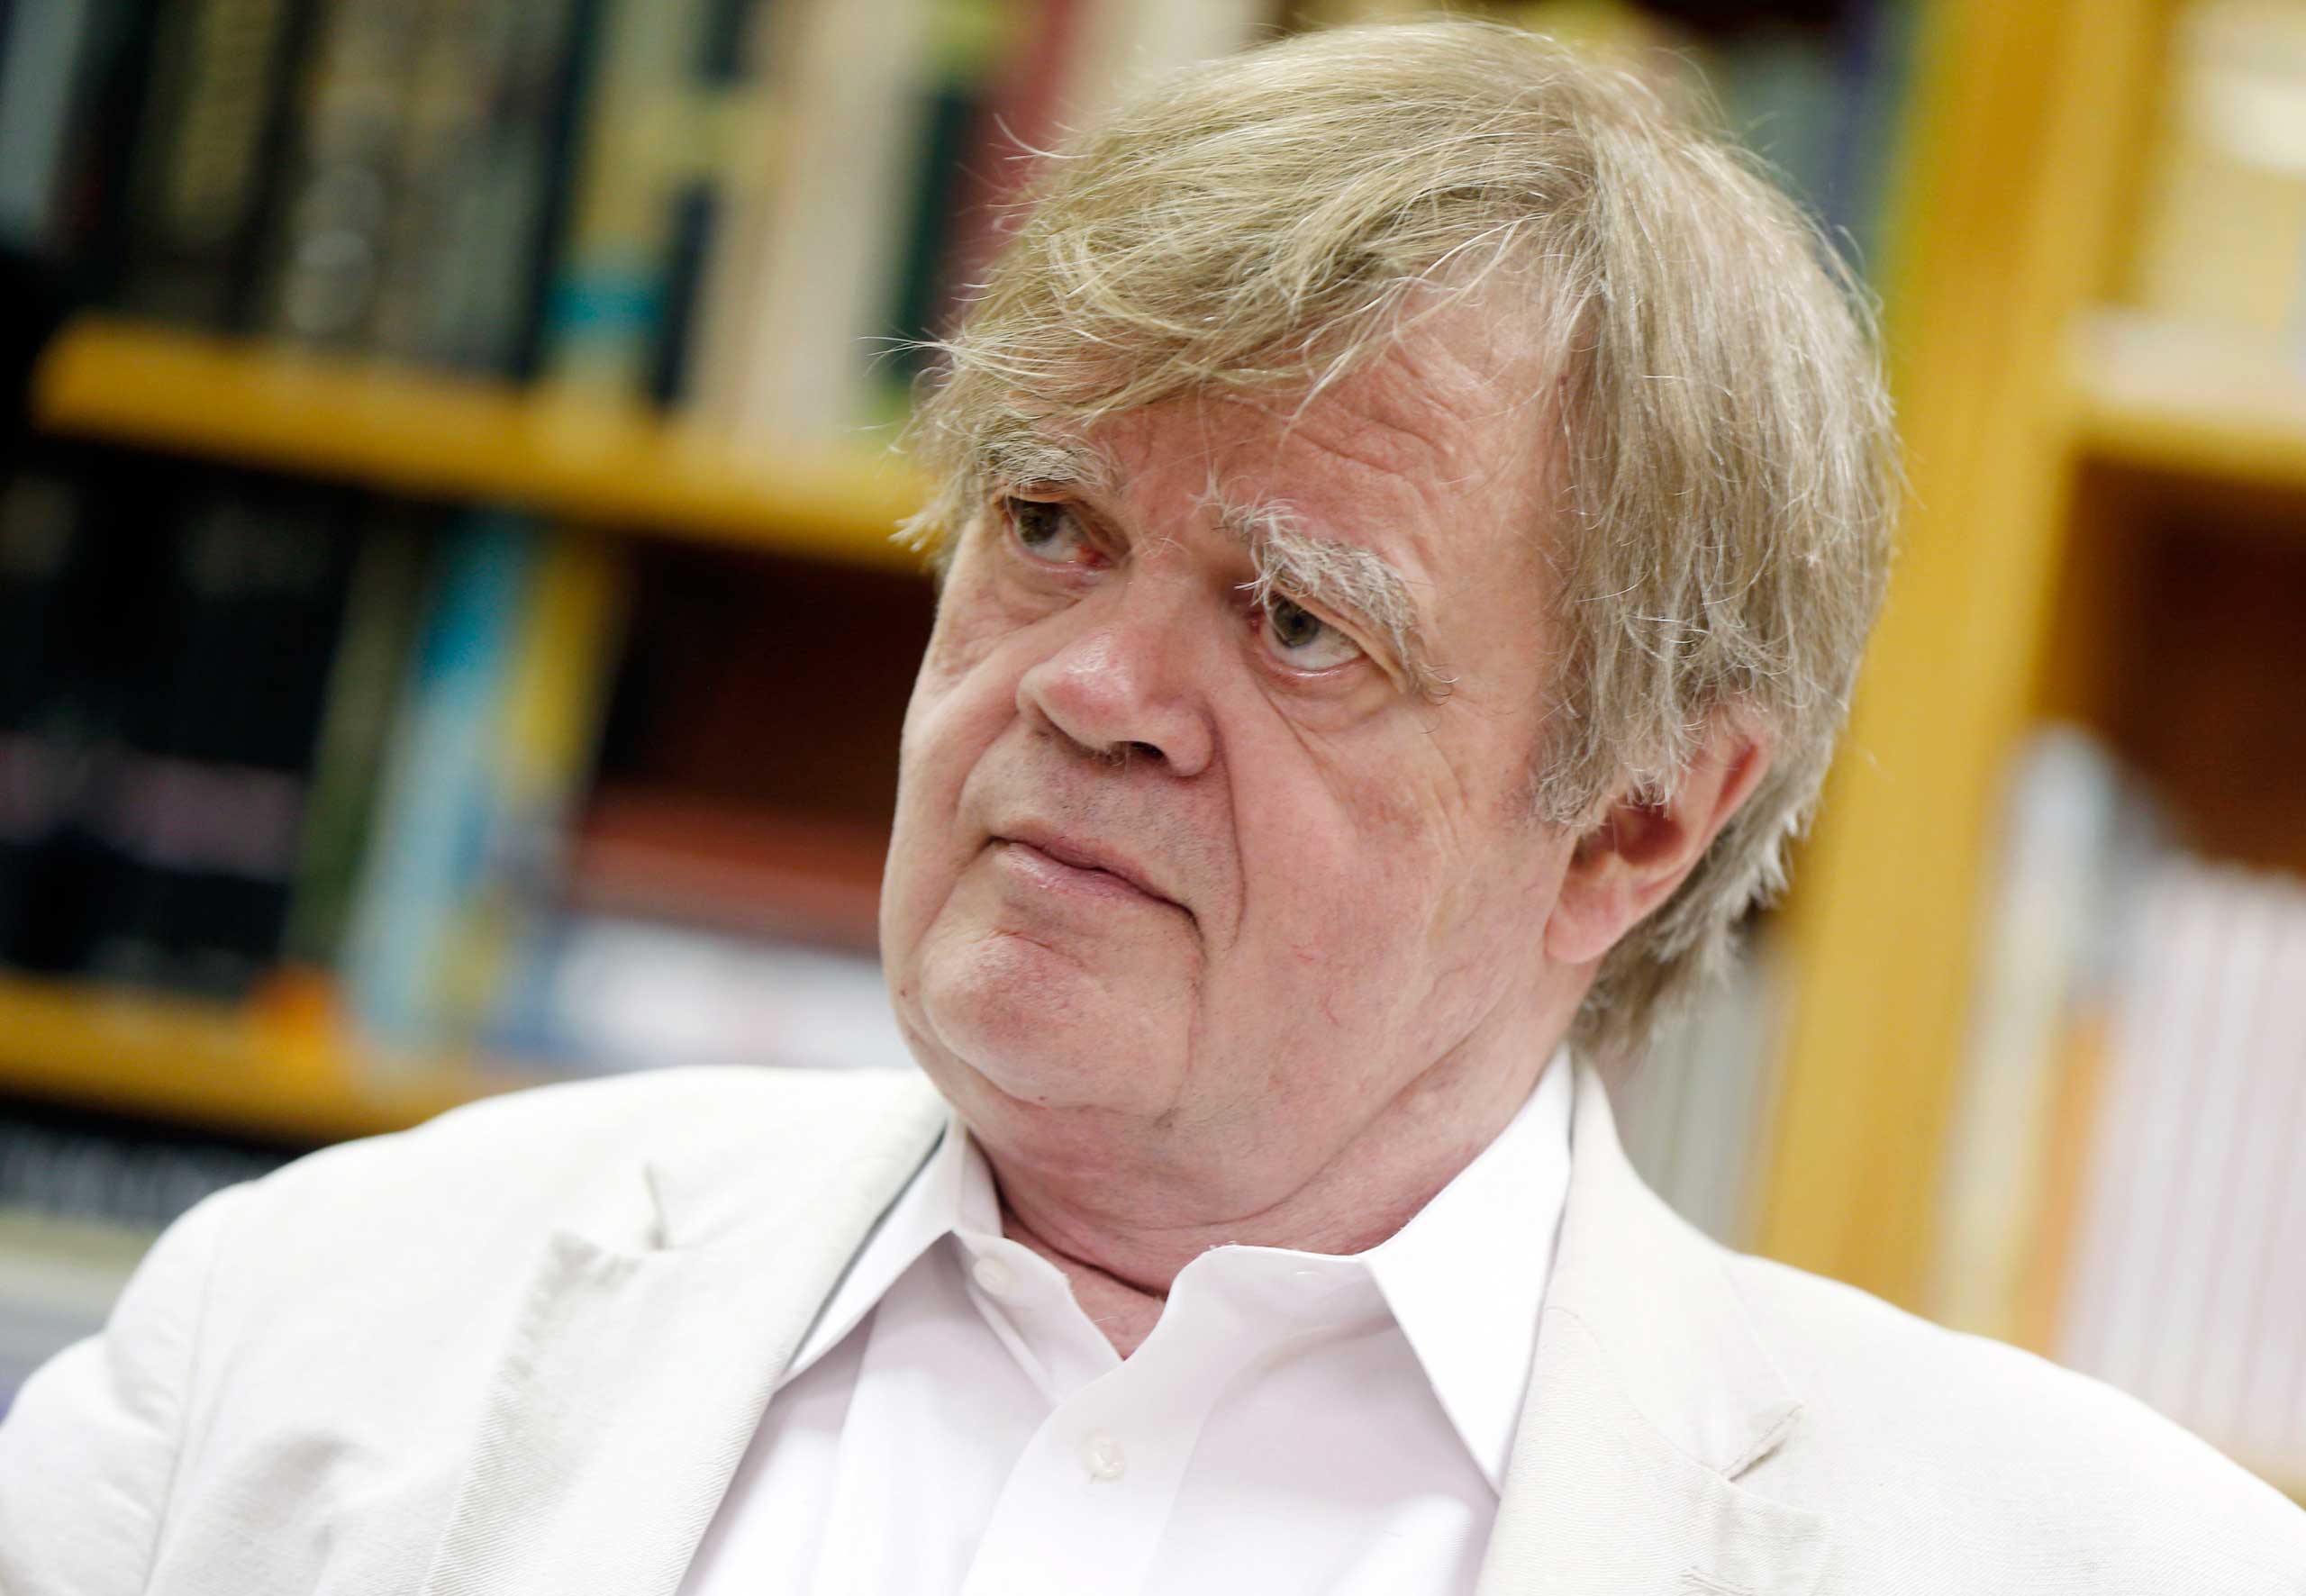 Garrison Keillor, creator and host of "A Prairie Home Companion, in an interview by The Associated Press, July 20, 2015, in St. Paul, Minn., said he plans to step down after next season and retire such popular sketches as “Guy Noir, Private Eye.” (Jim Mone—AP)